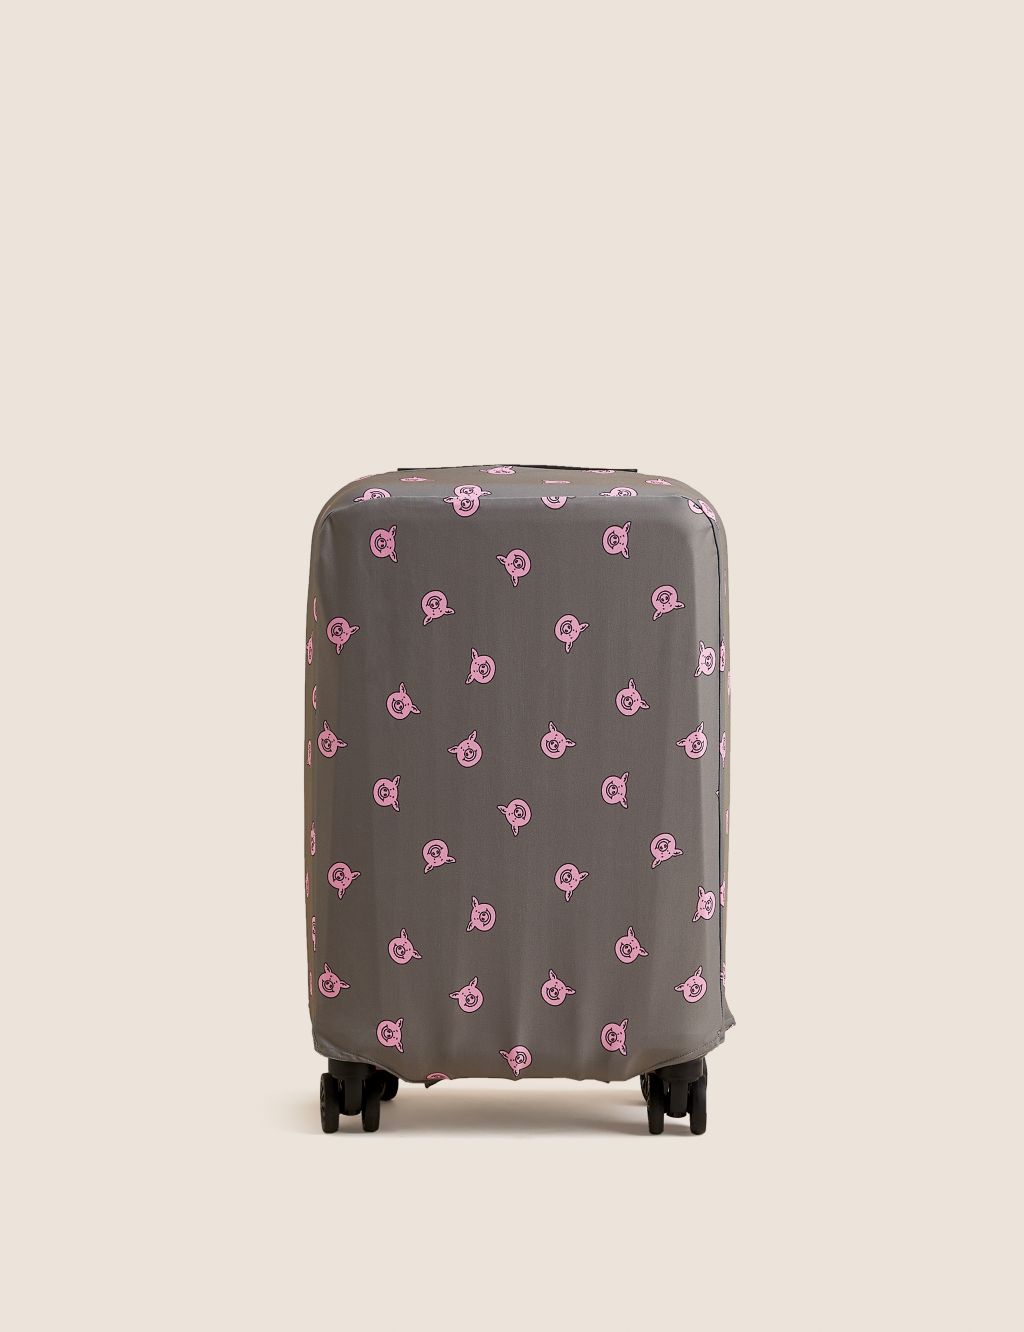 Percy Pig™ Suitcase Cover image 2